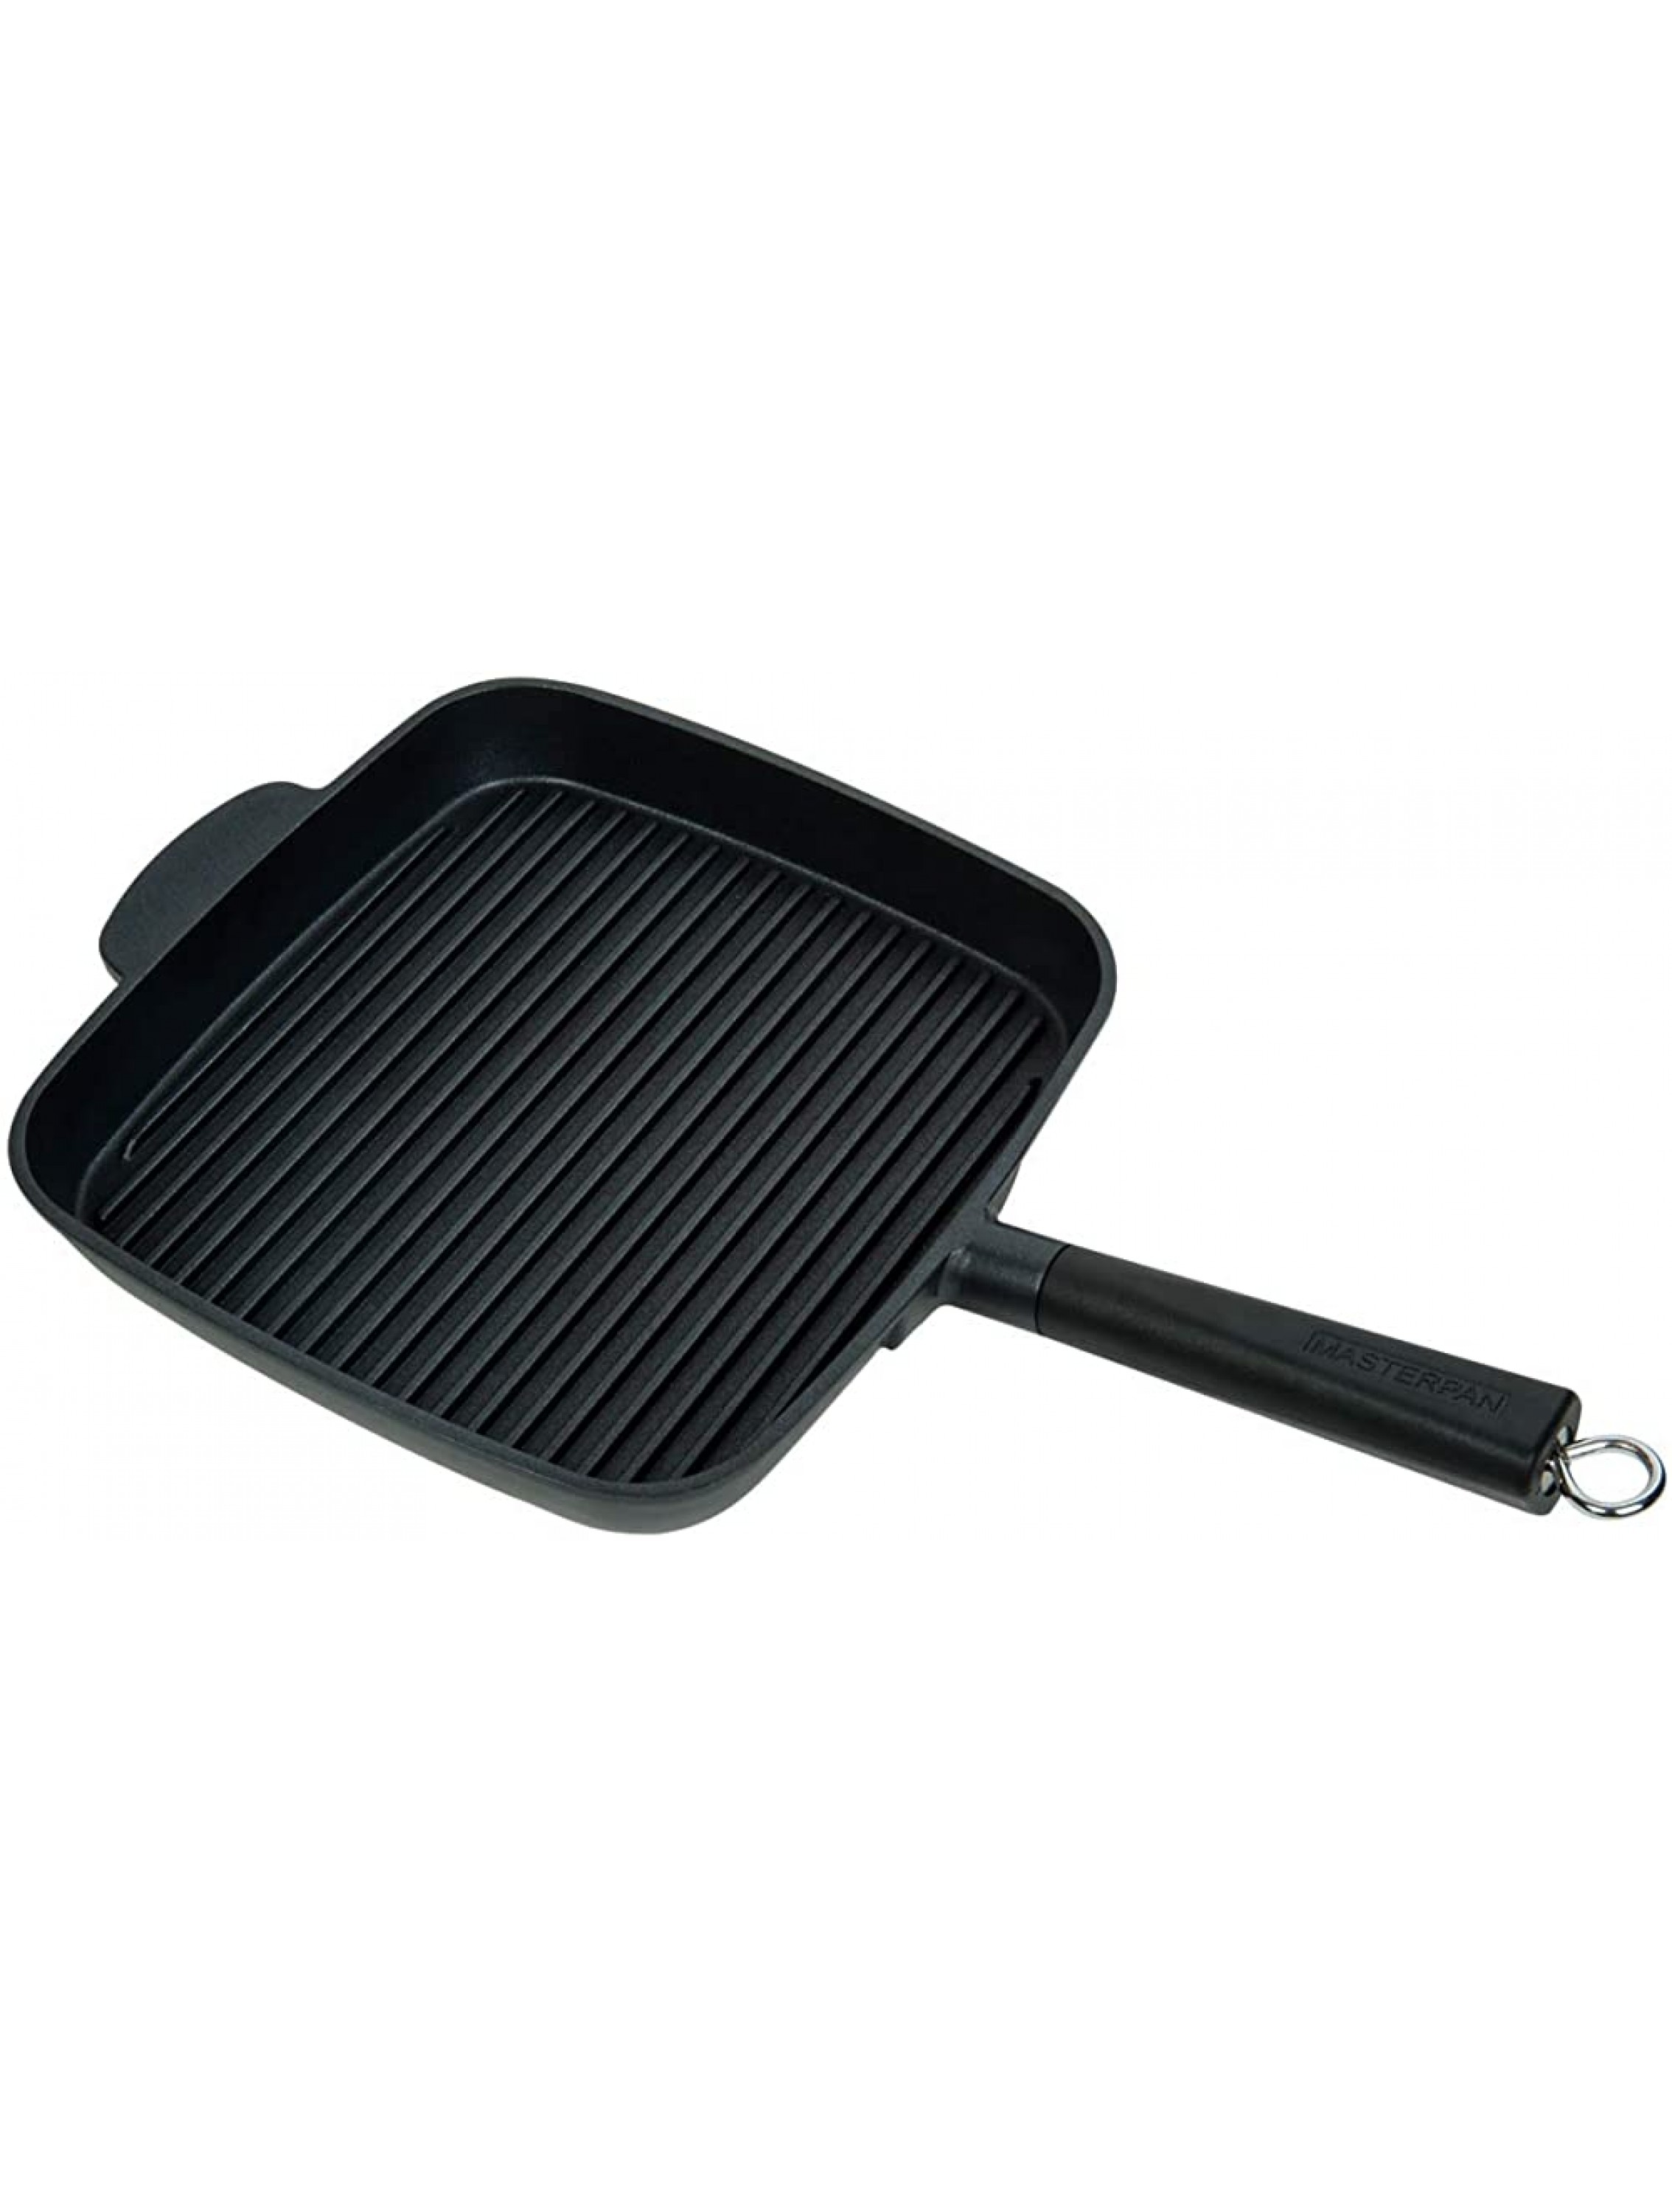 MasterPan Ultra Nonstick Deep Grill Frying Pan with Detachable Handle 11 Black, - BBC5TML96